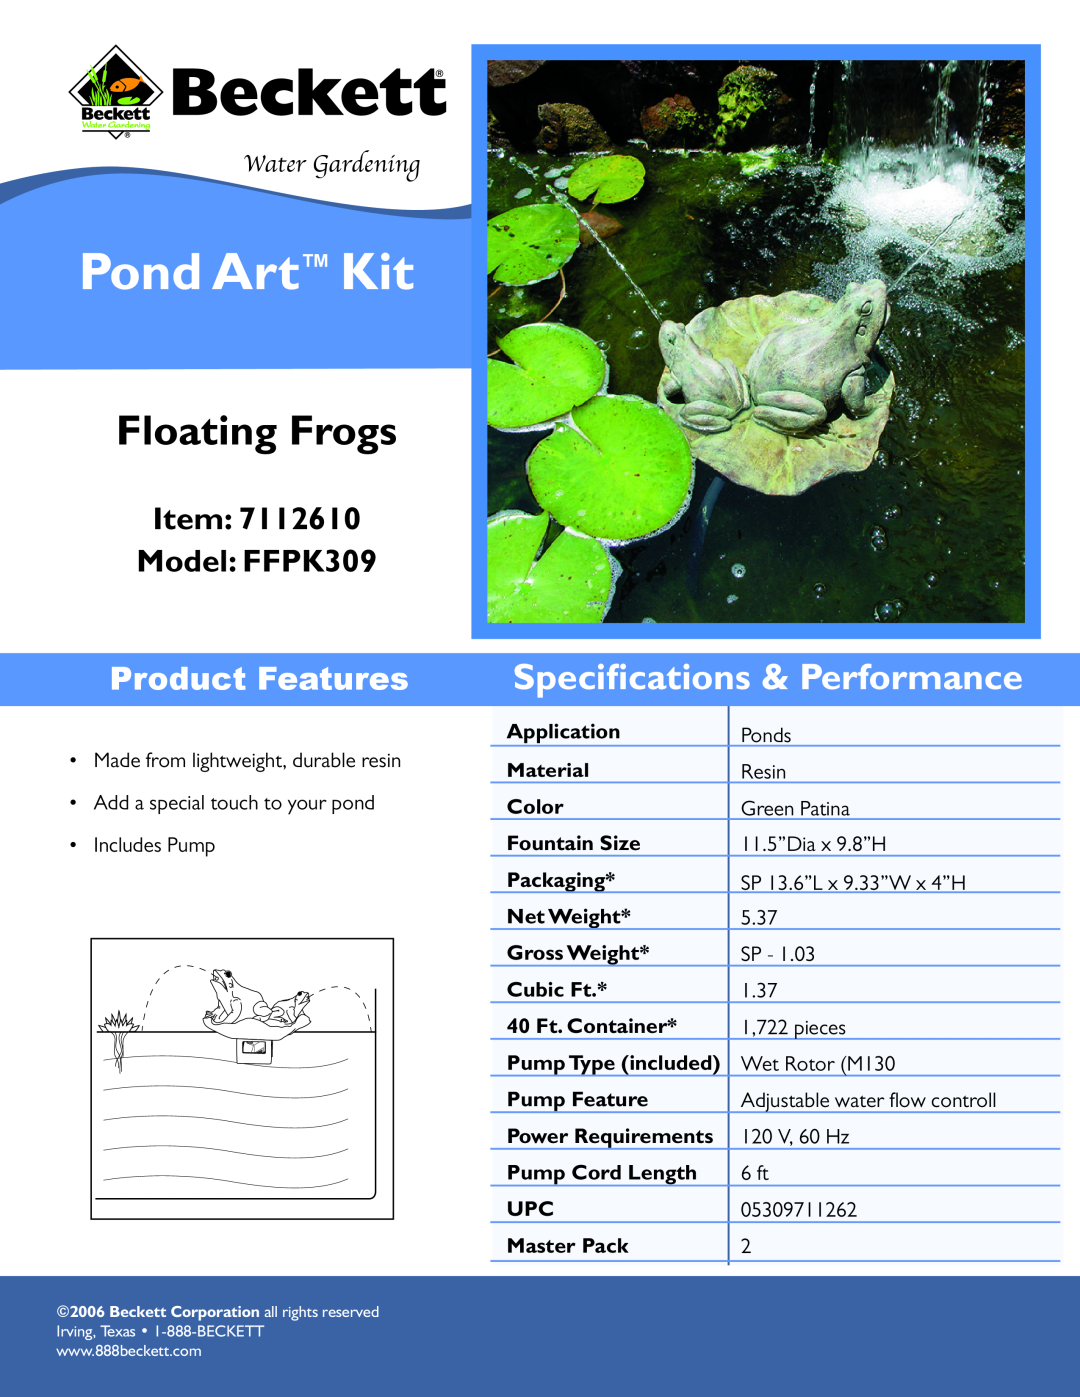 Beckett Water Gardening FFPK309 specifications Pond Art Kit, Floating Frogs, Speciﬁcations & Performance, Product Features 